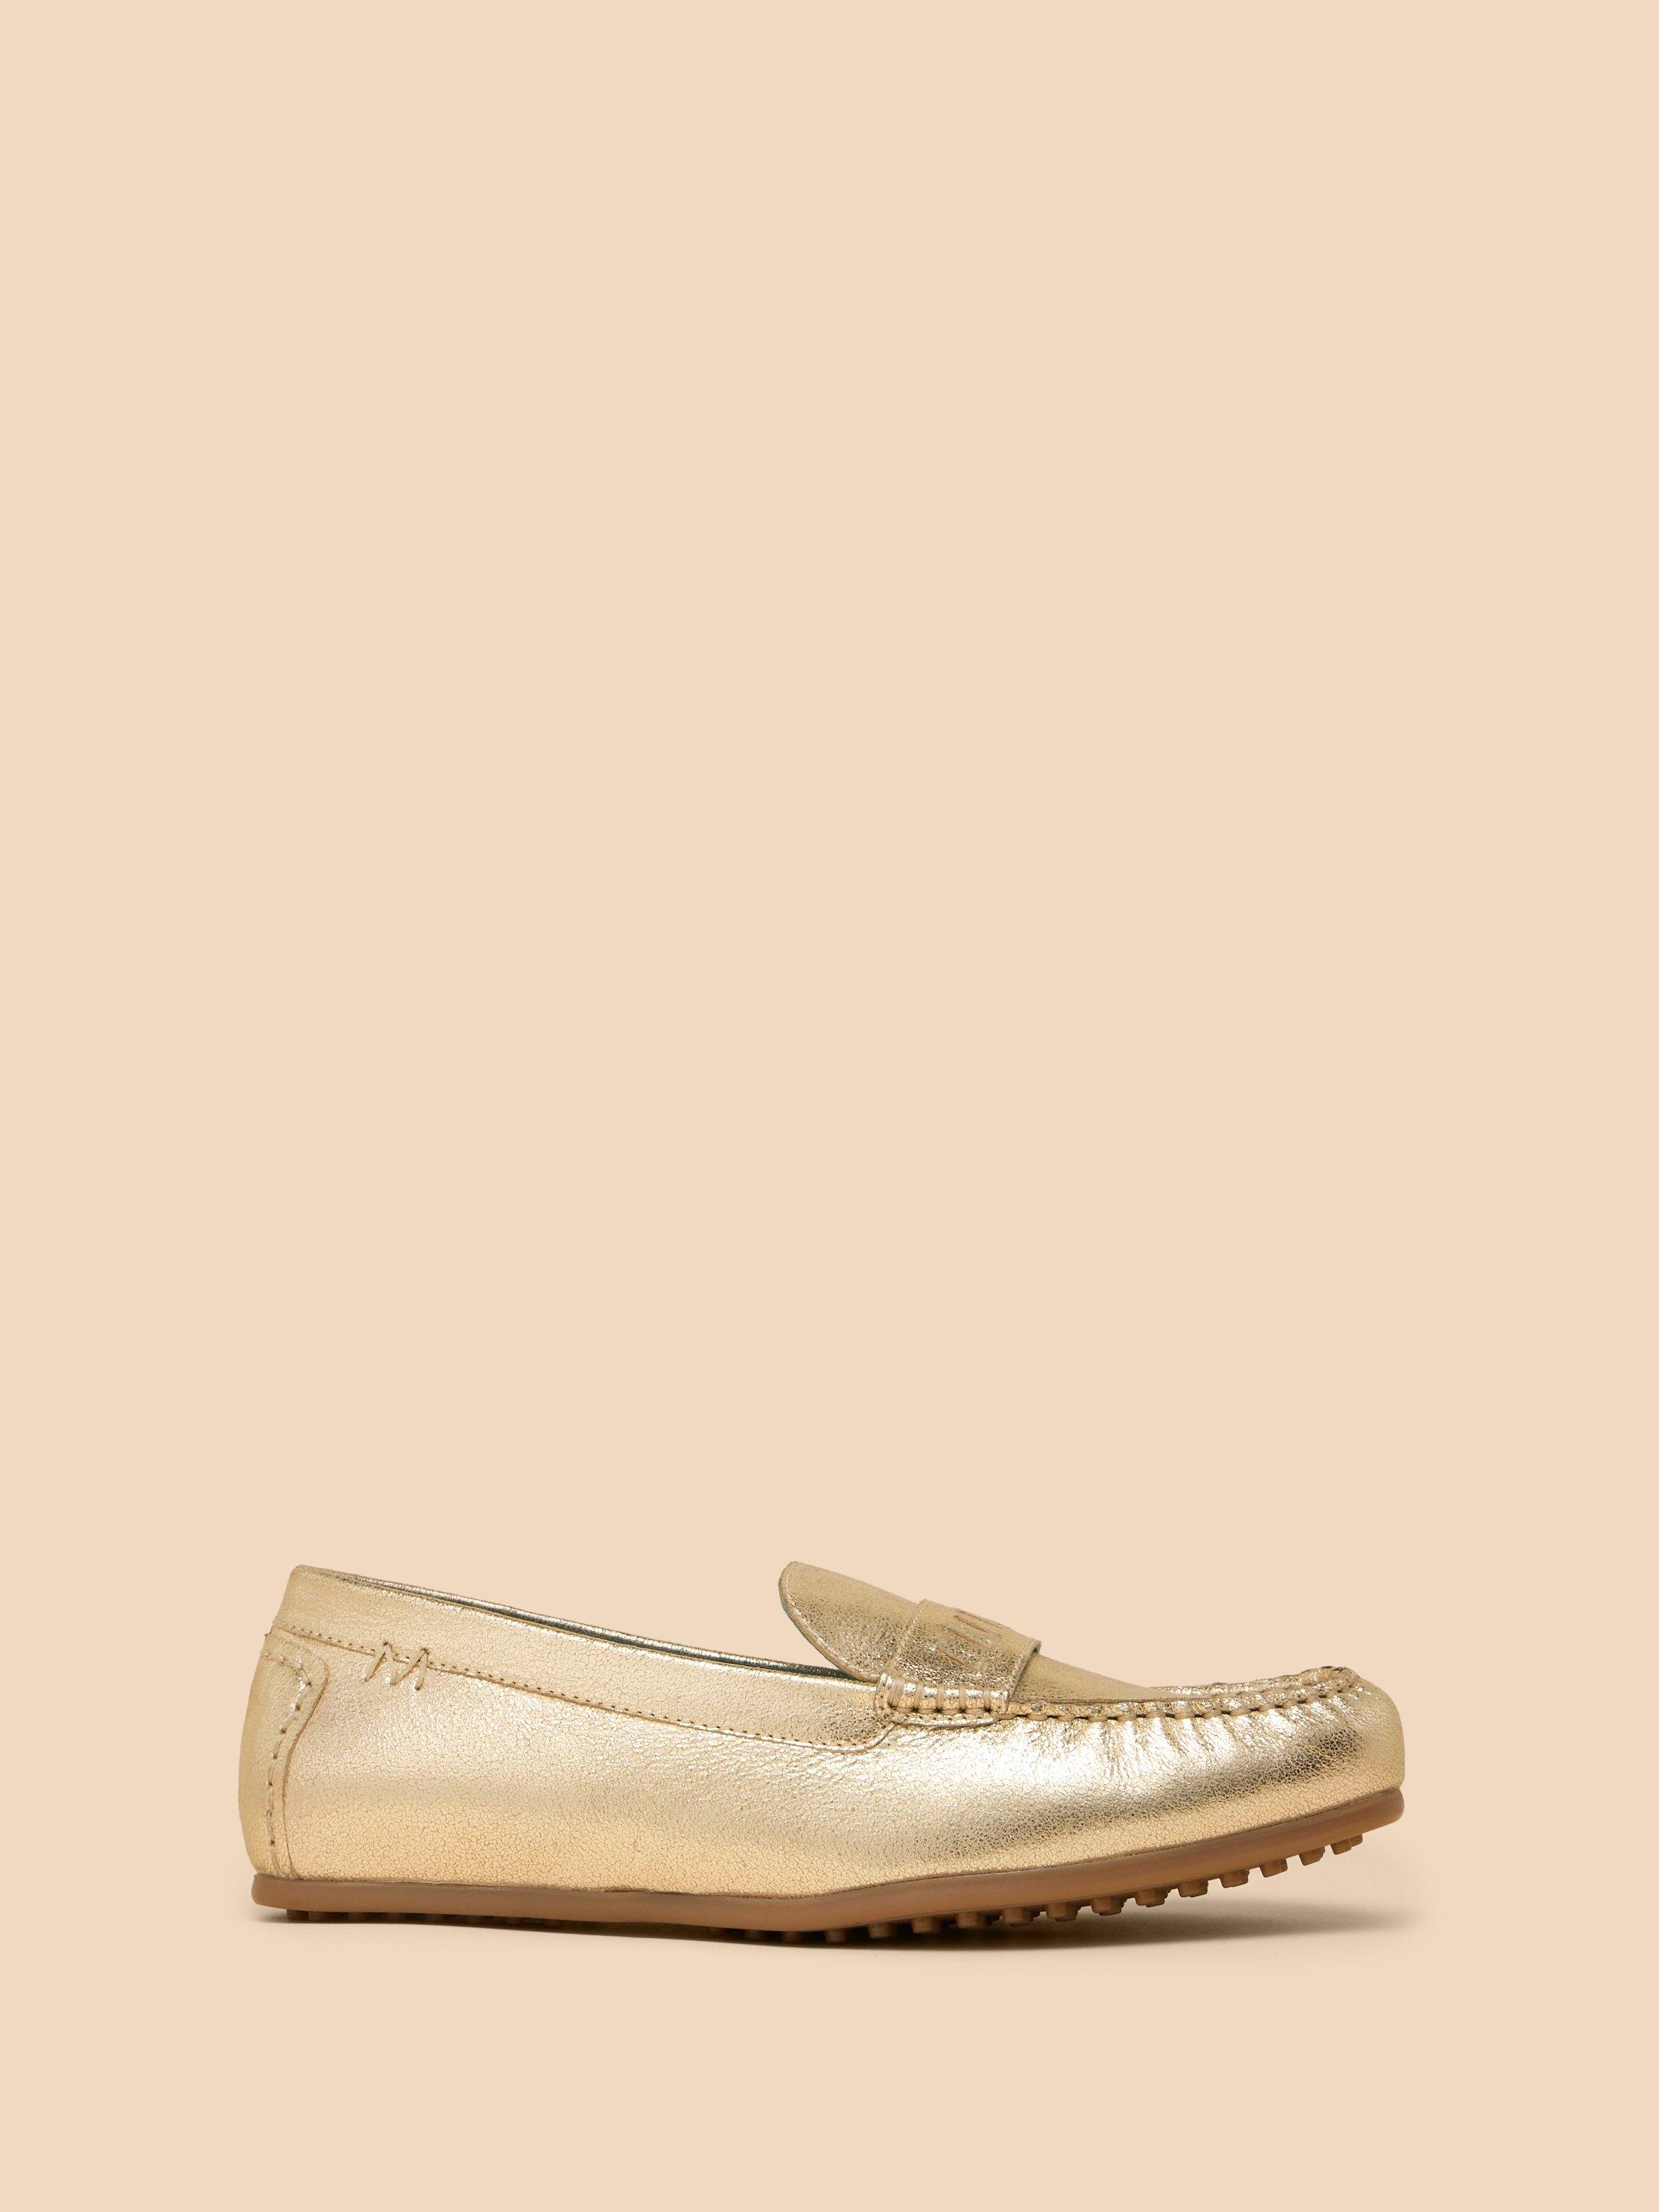 Mayflower Suede Moccasin in GLD TN MET - LIFESTYLE